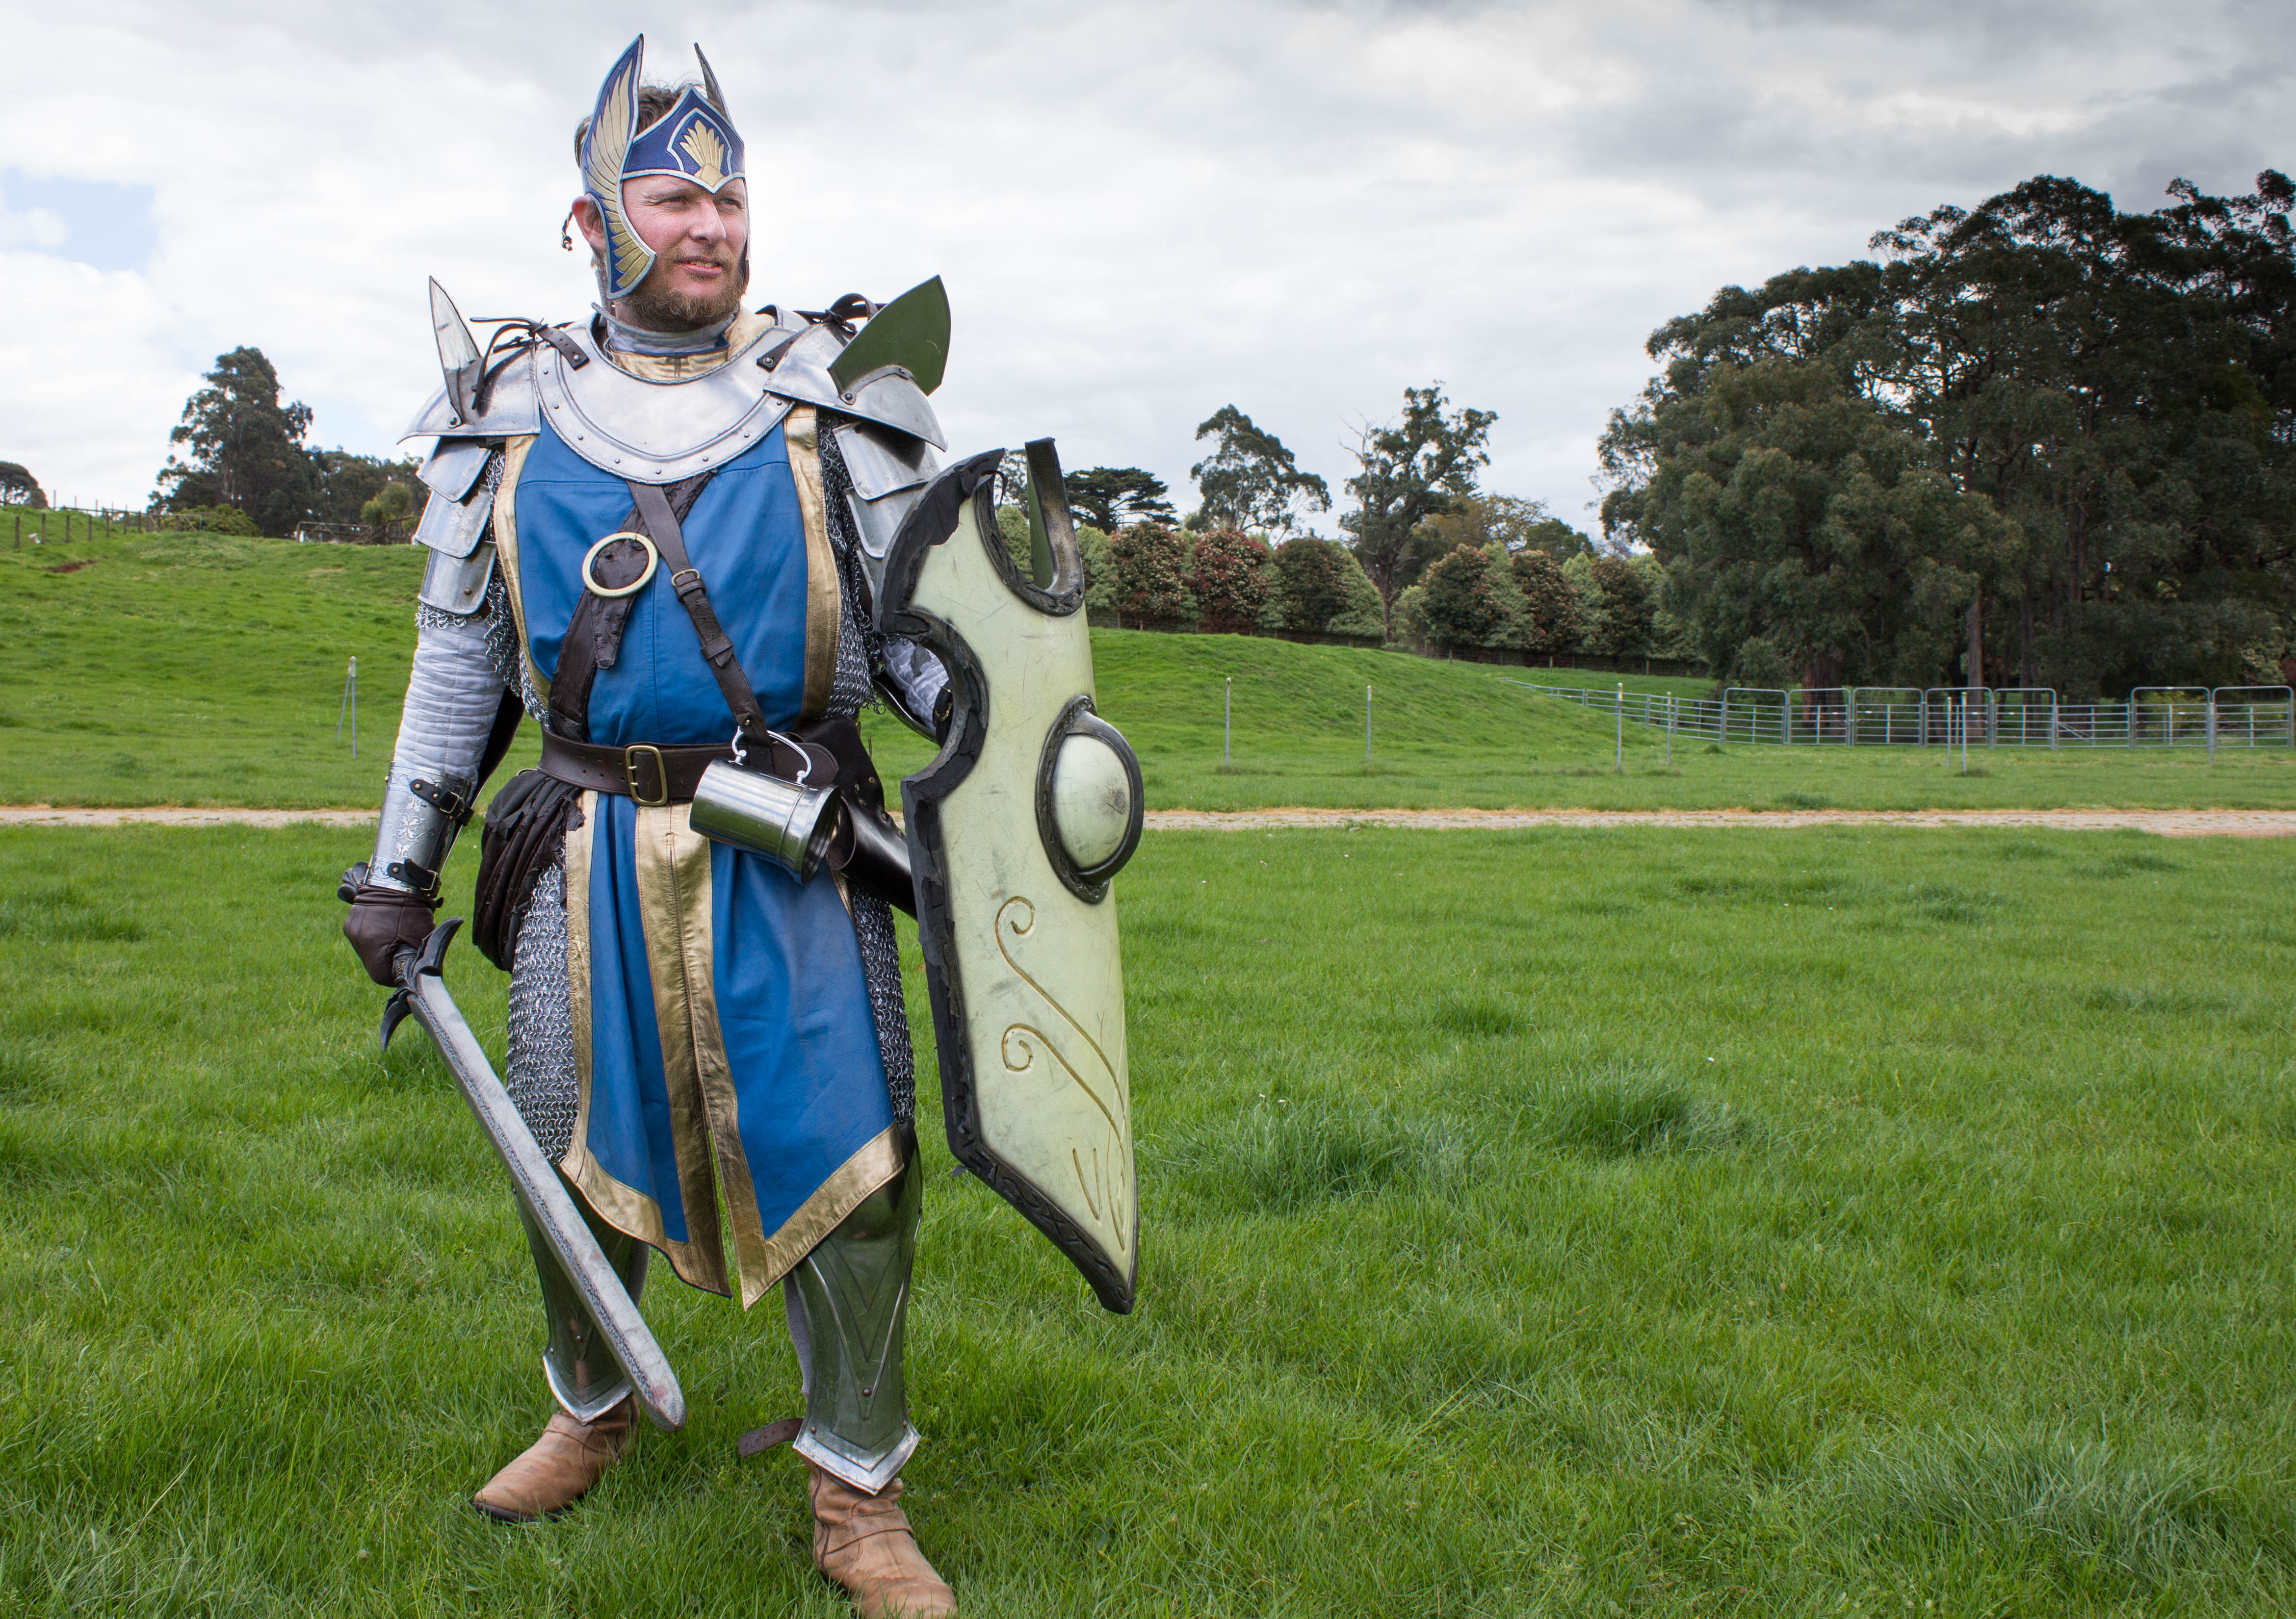 Phill Krins dressed as an Elvan character at Swordcraft, in Leongatha Gippsland.